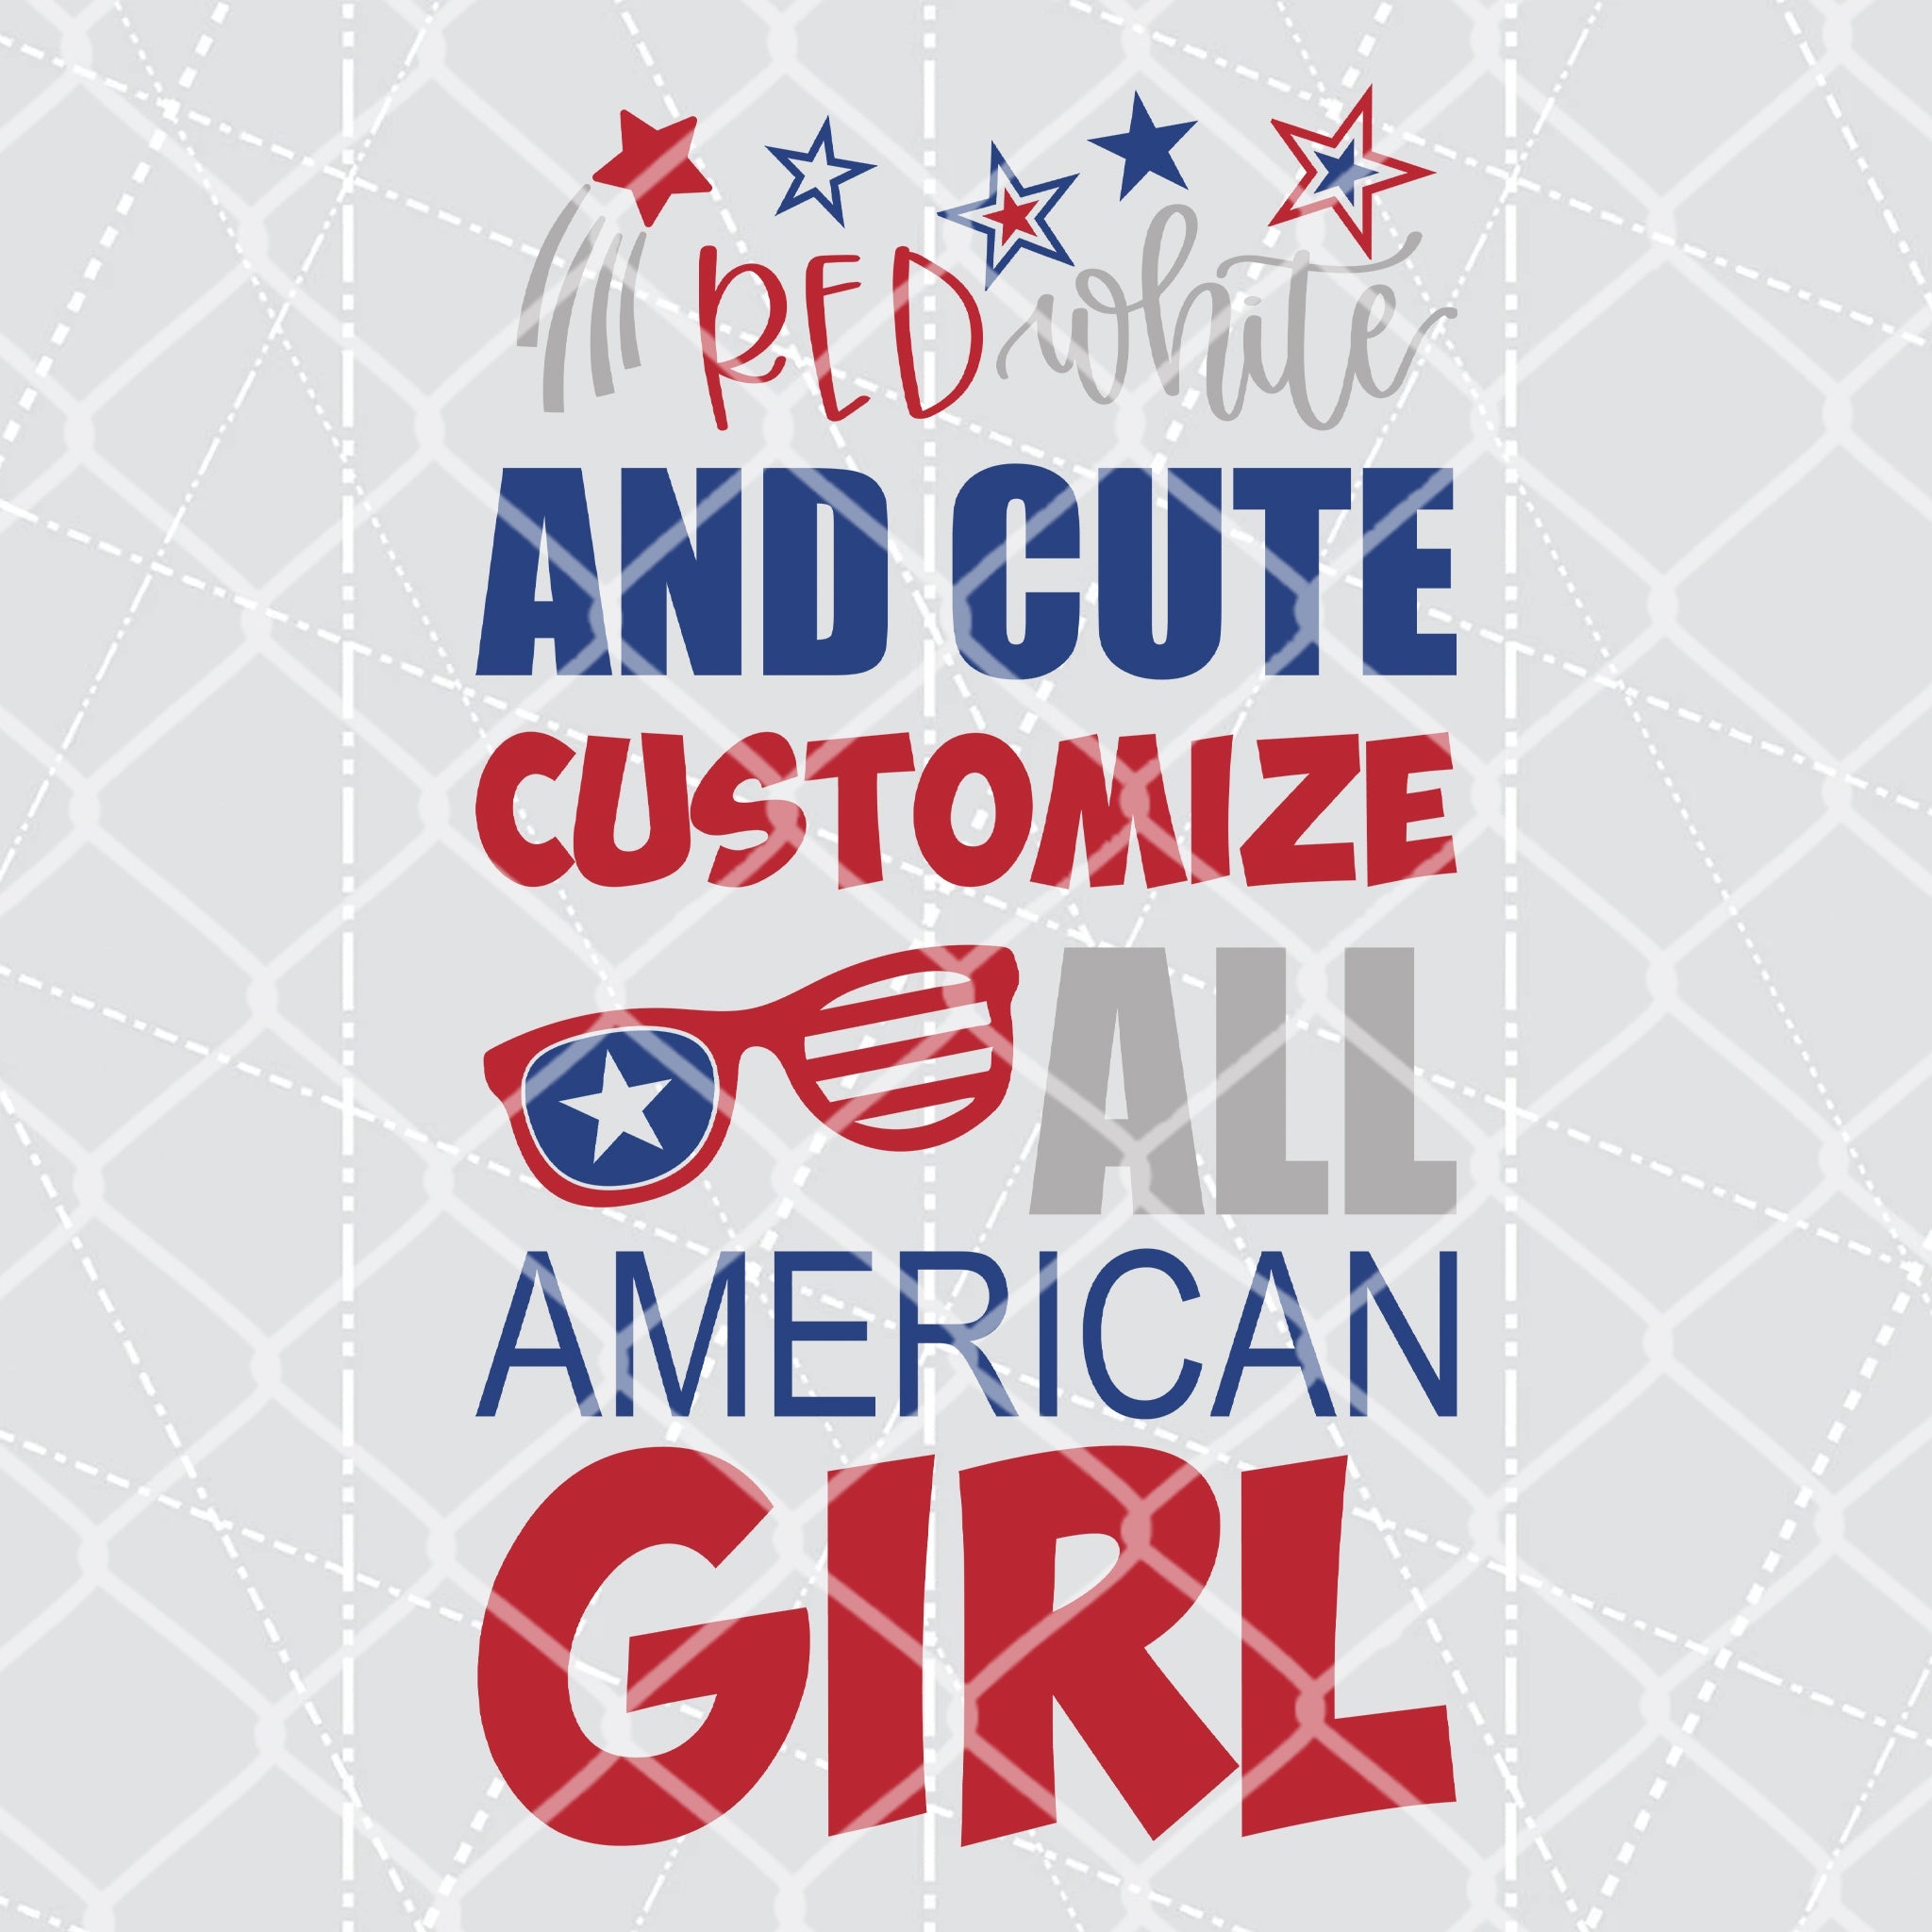 Red White And Cute All American Girl - Customize